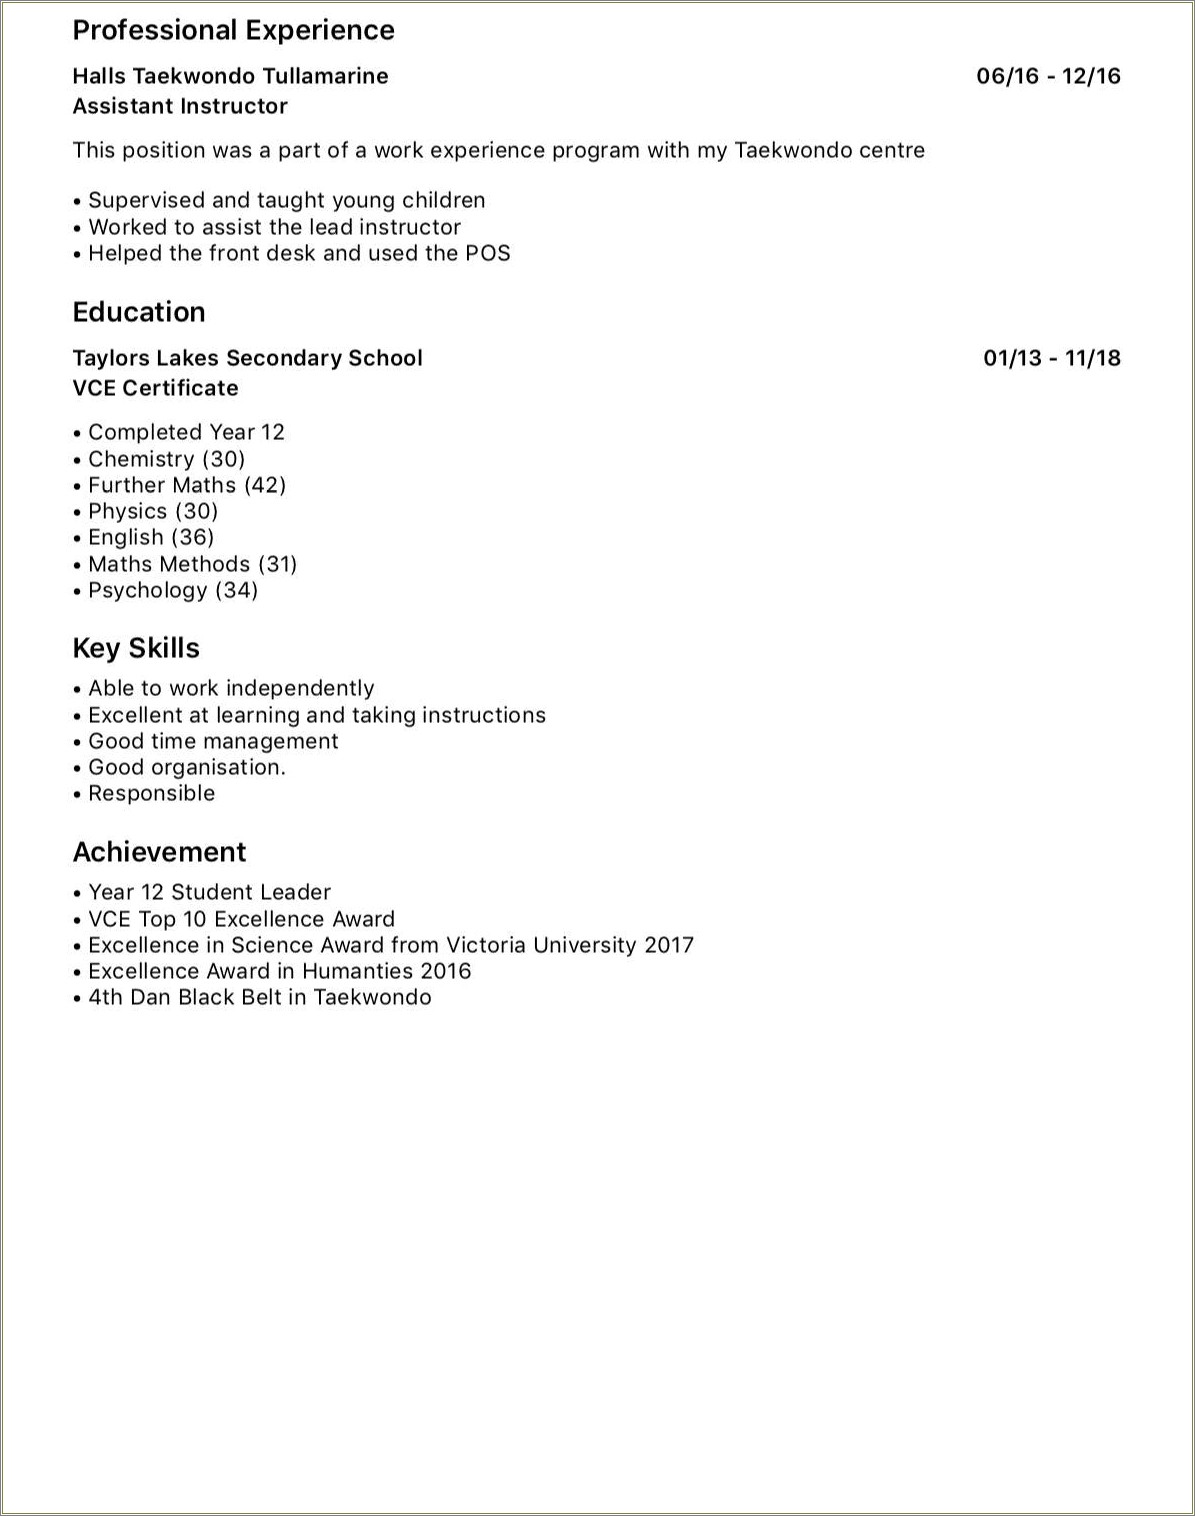 Relevant Experience Or Technical Experience Resume Reddit